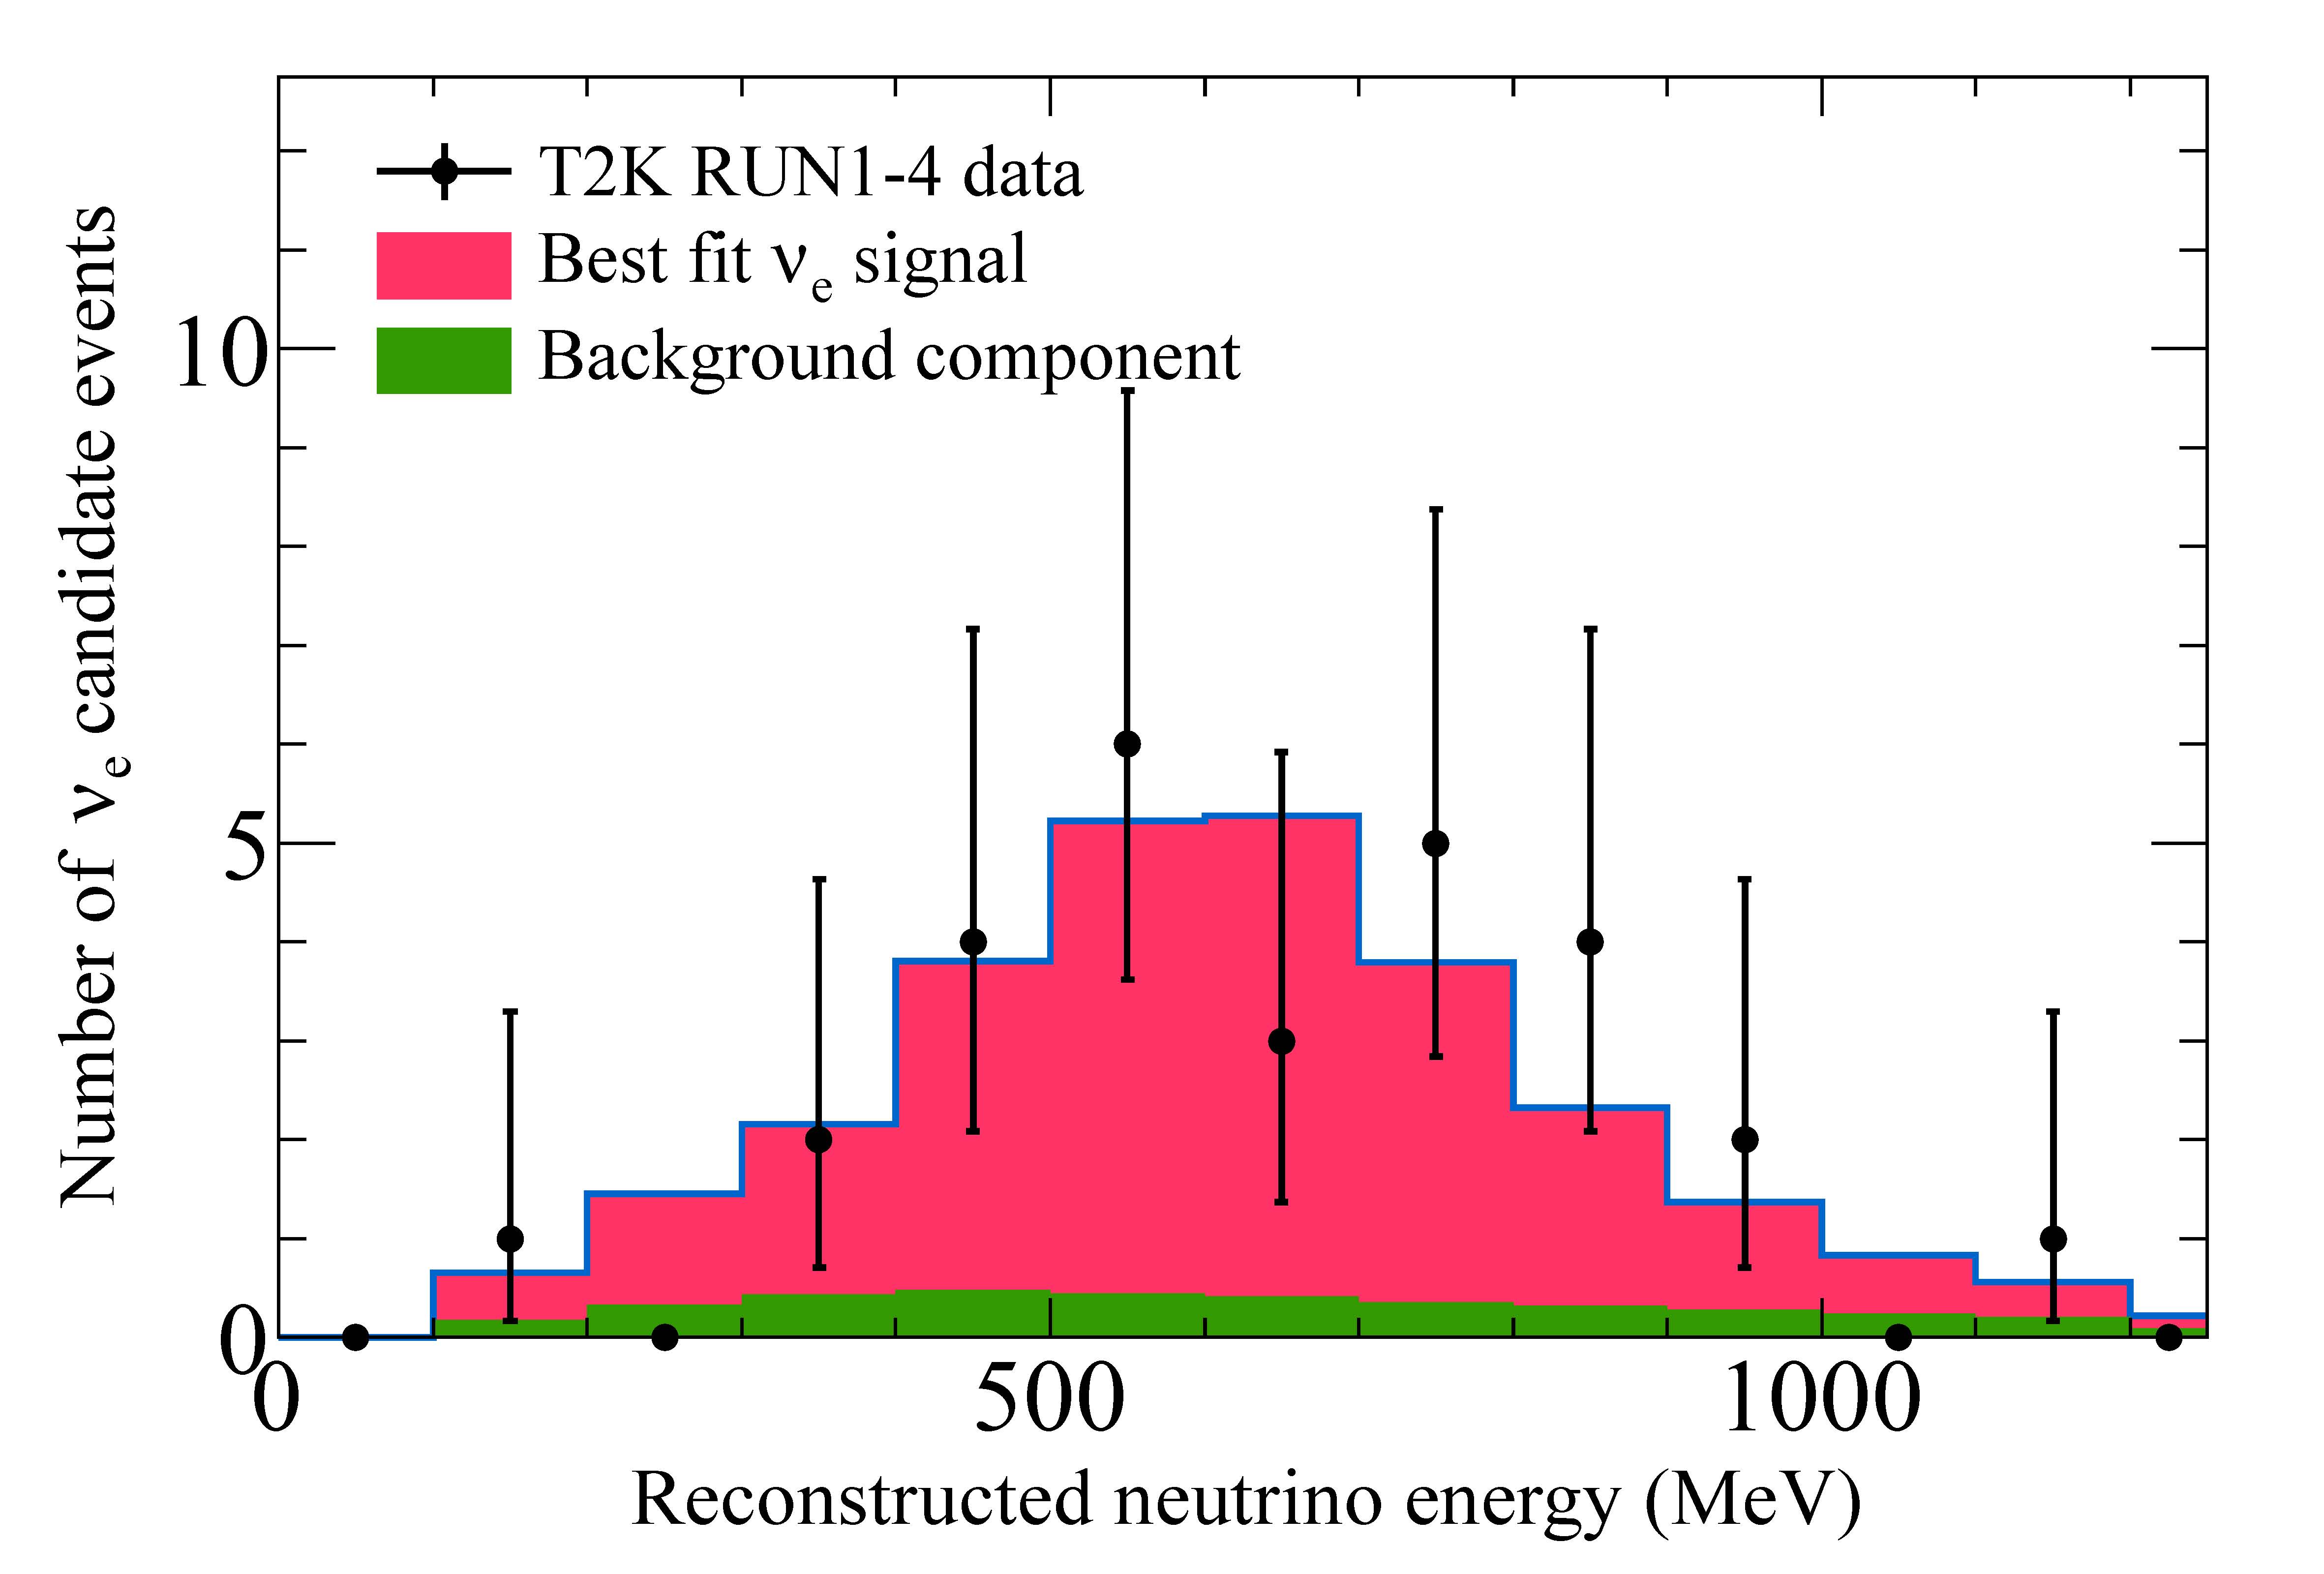 Reconstructed energy distribution of electron neutrino candidates